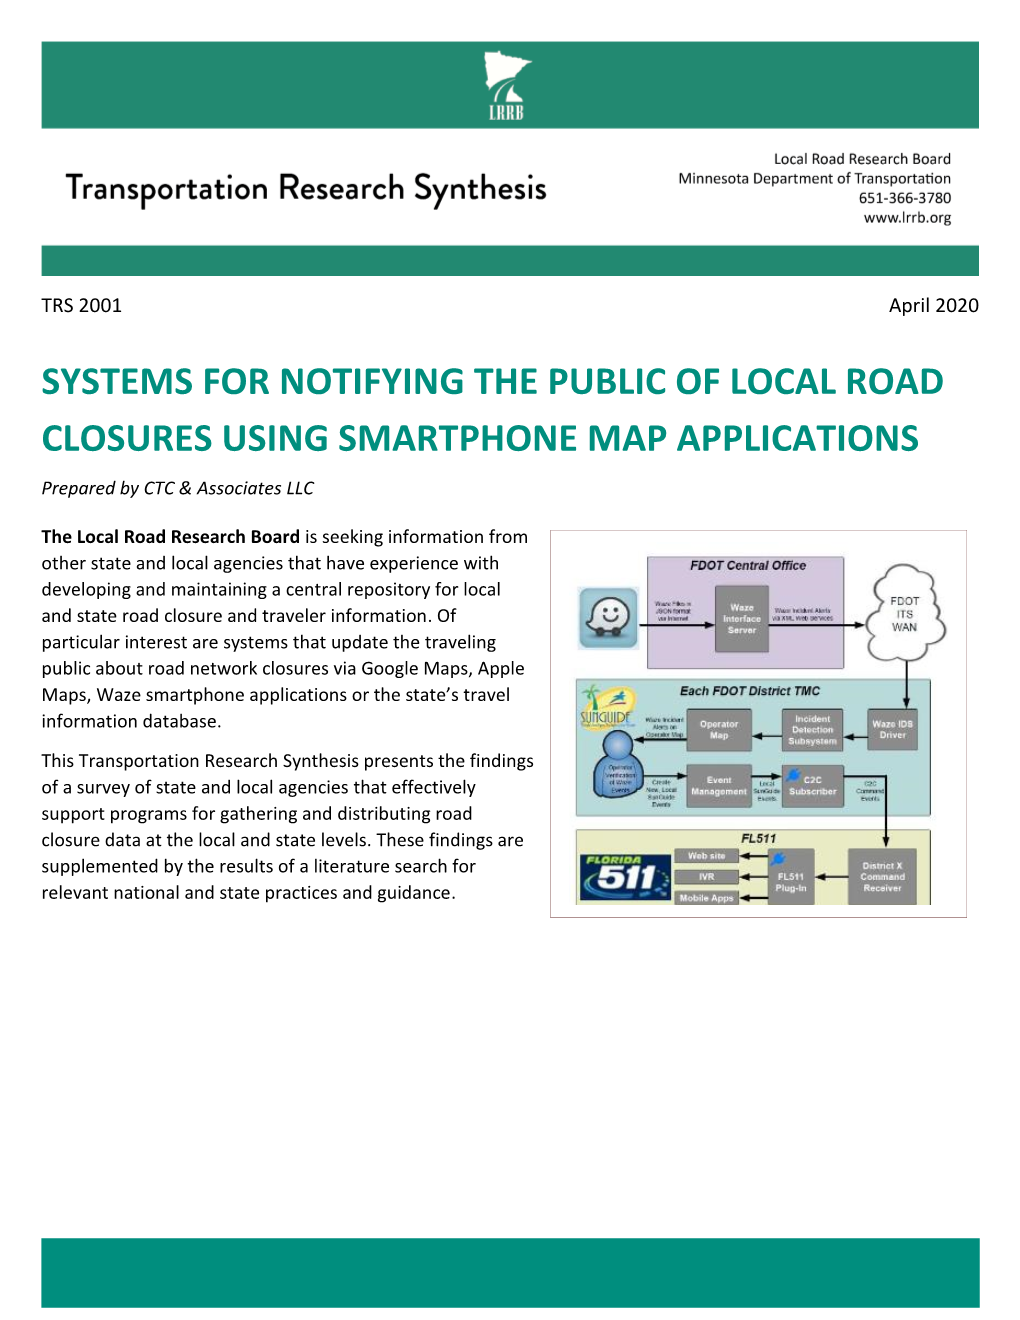 SYSTEMS for NOTIFYING the PUBLIC of LOCAL ROAD CLOSURES USING SMARTPHONE MAP APPLICATIONS Prepared by CTC & Associates LLC